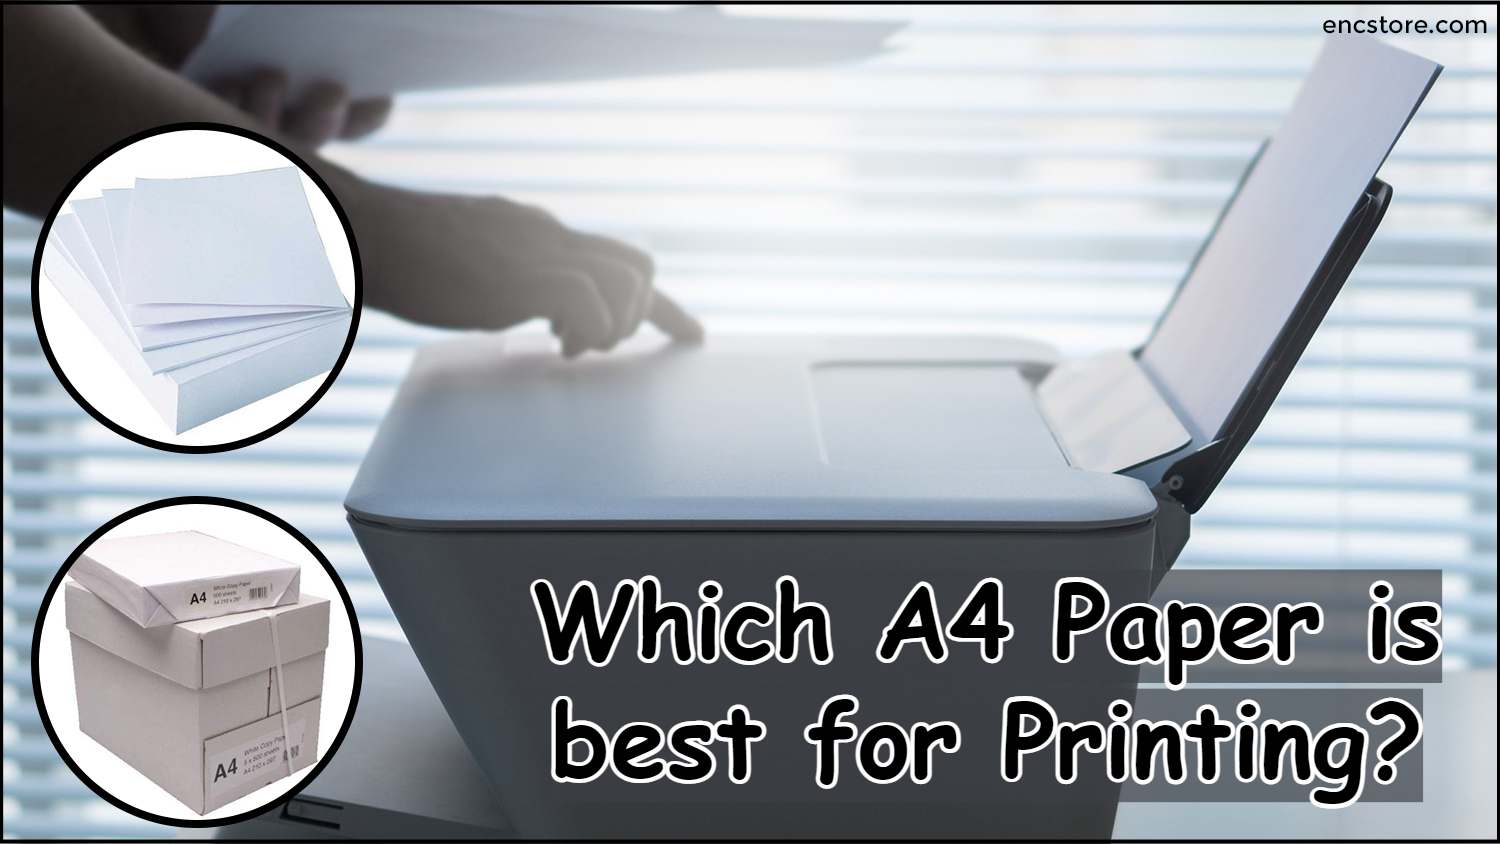 Which A4 Paper is best for Printing?